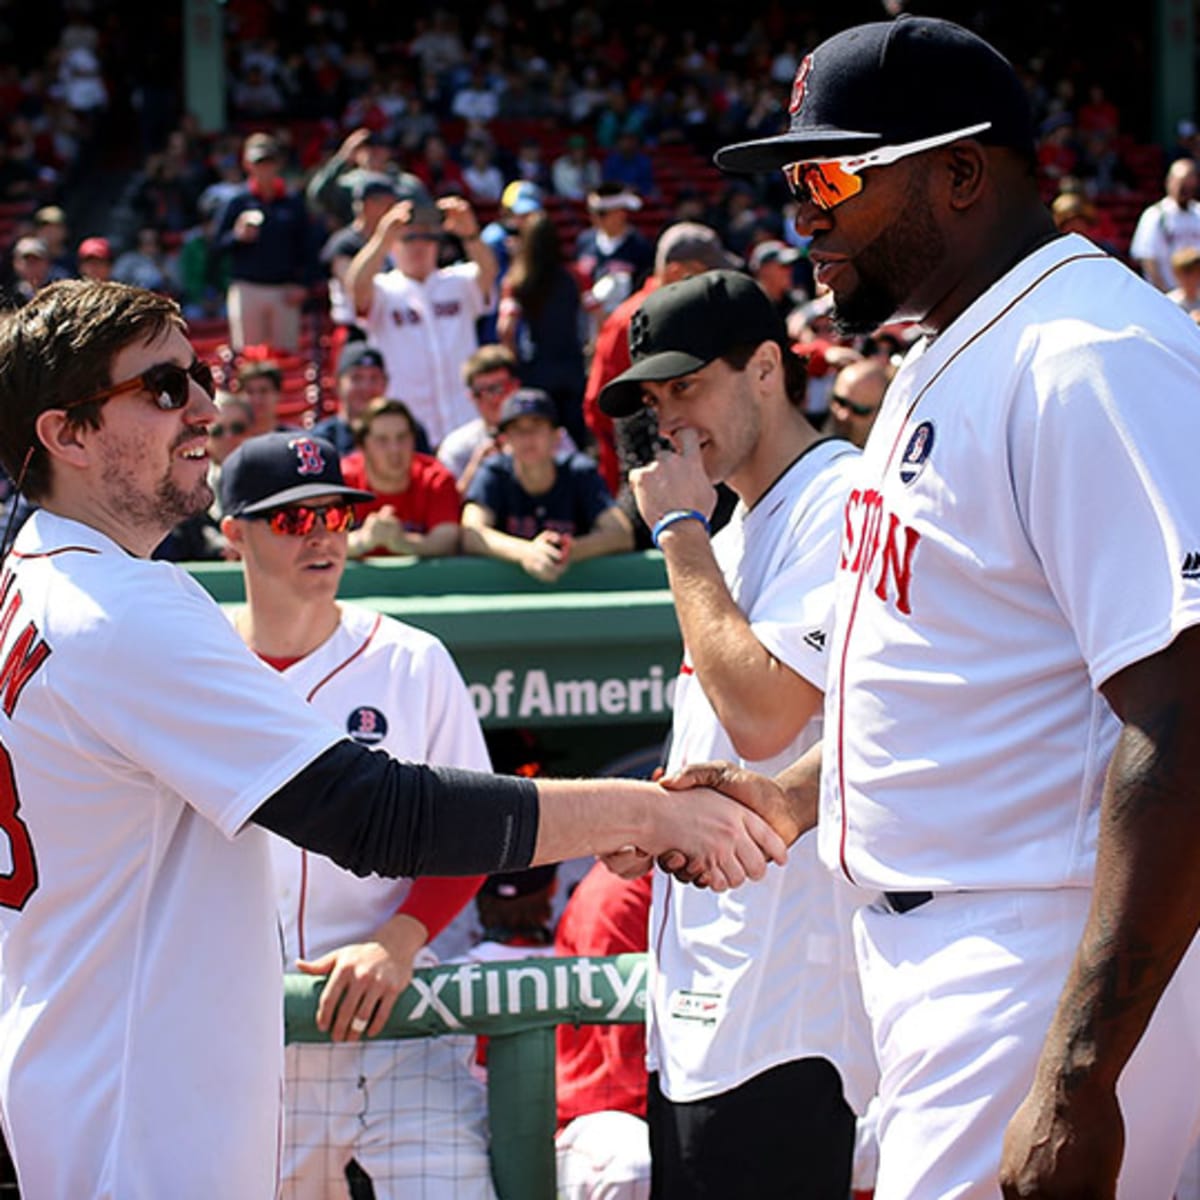 BOSTON — A year after the Boston Marathon bombings, the Red Sox